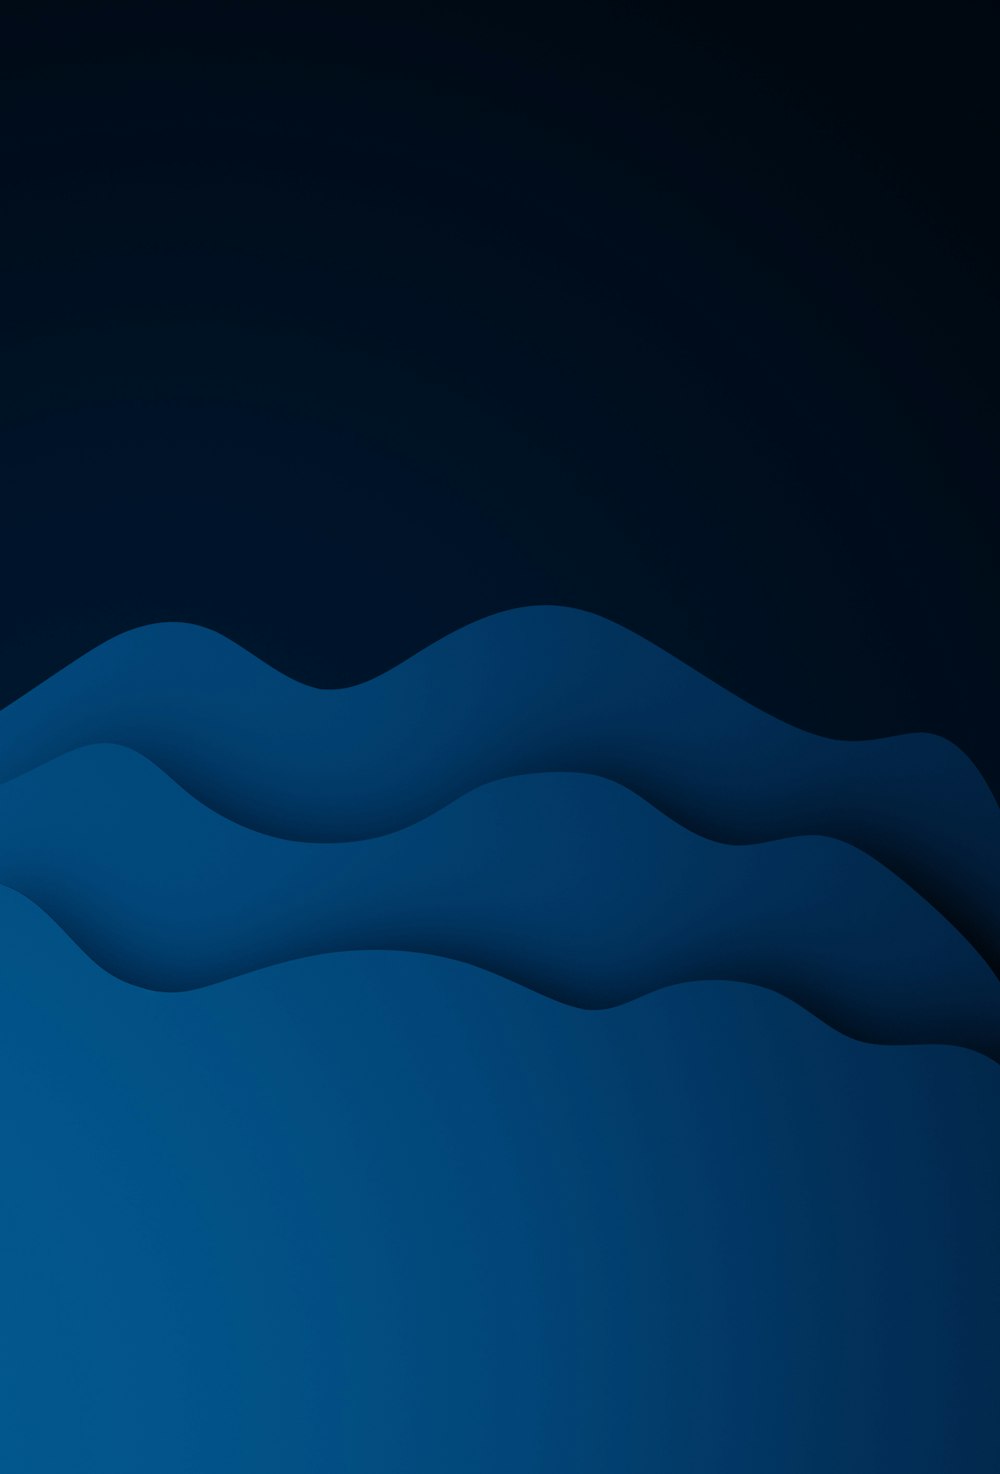 a dark blue background with wavy shapes